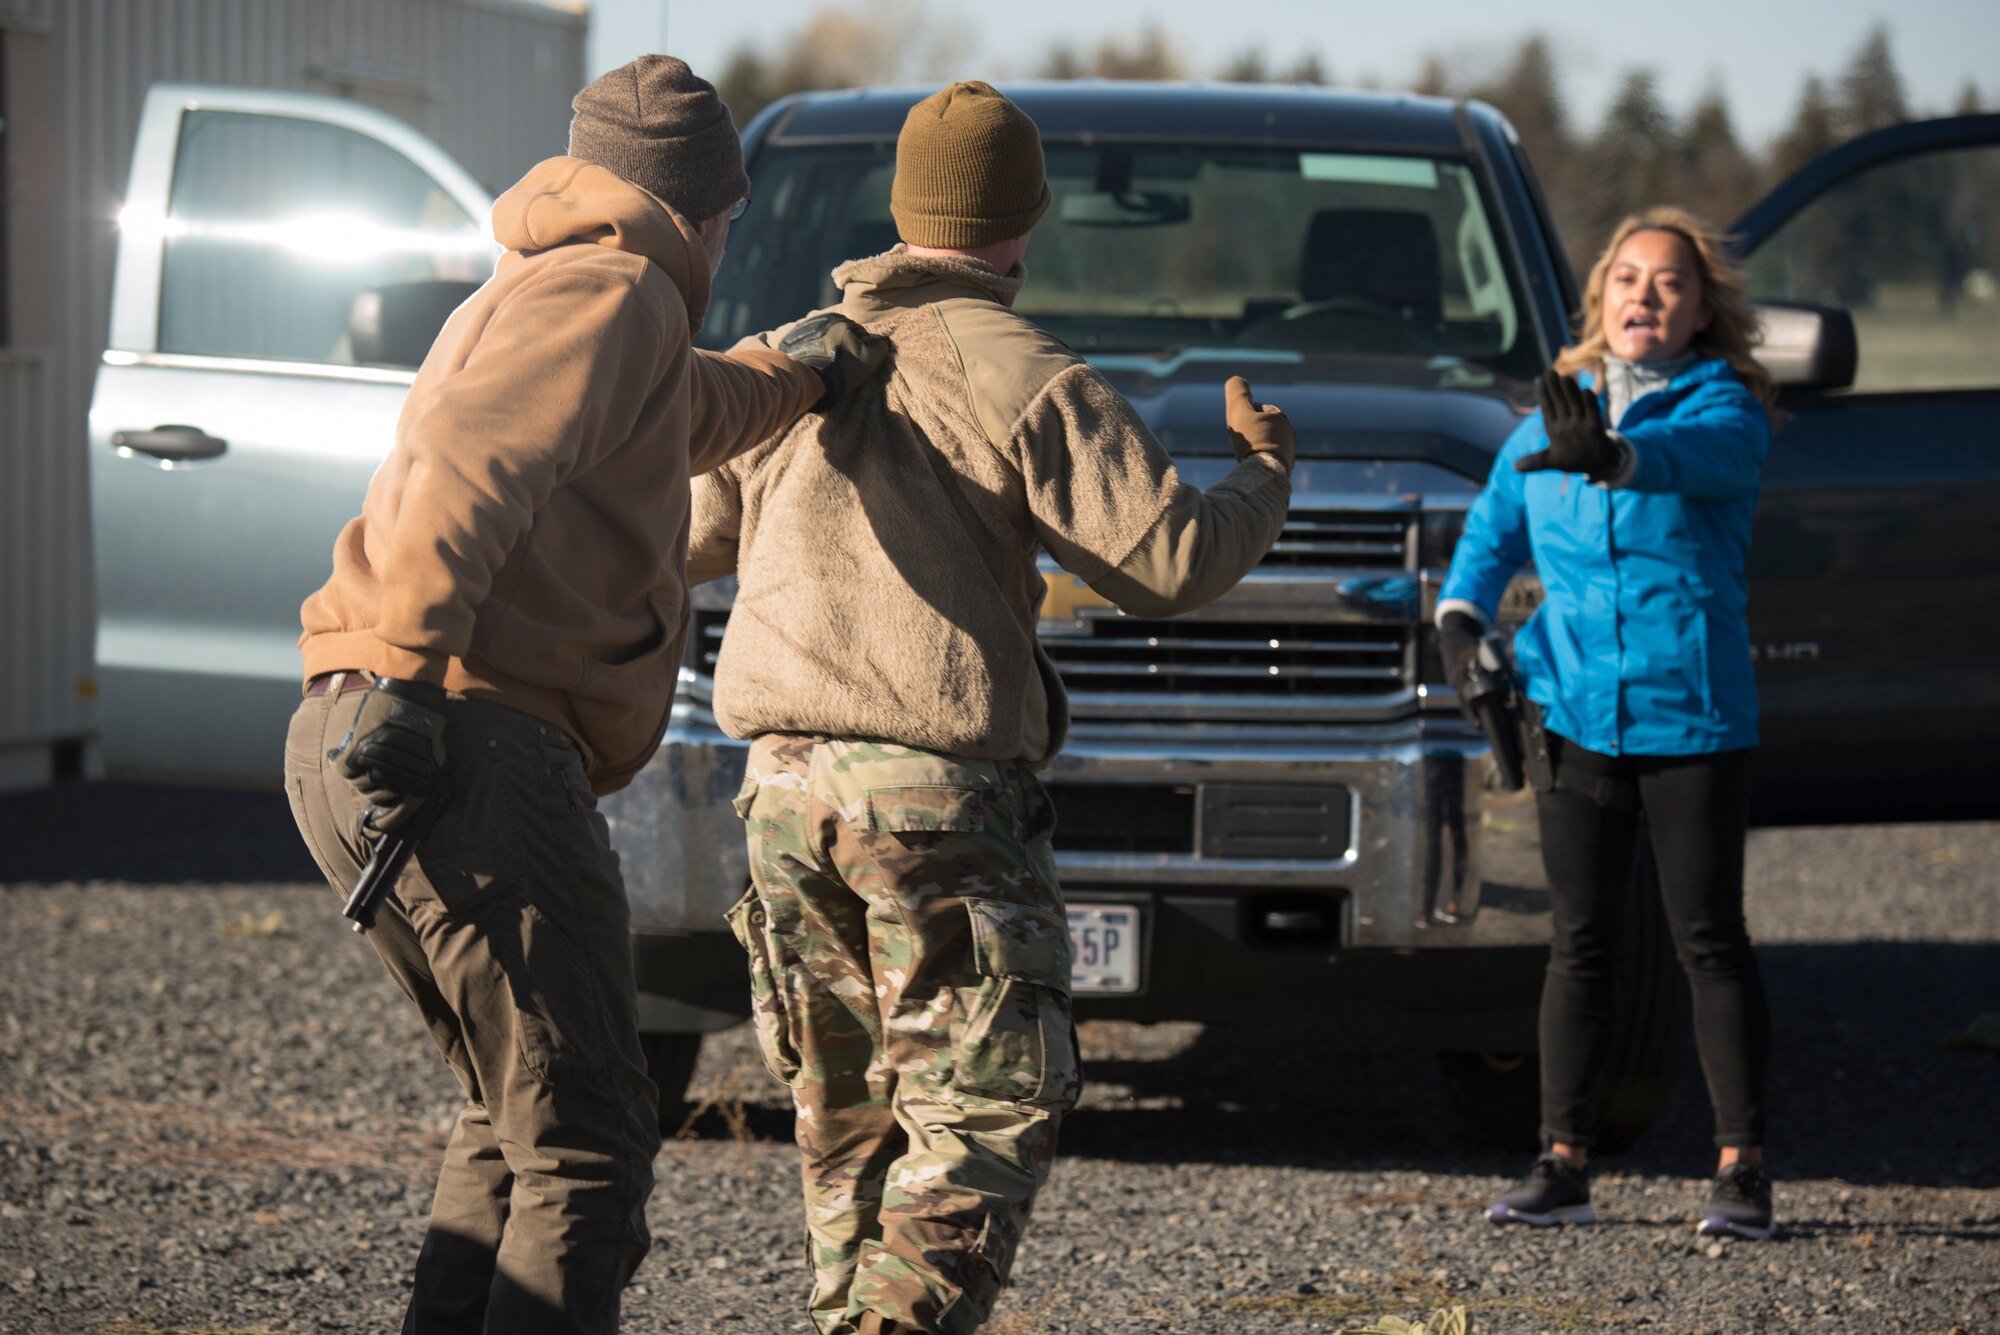 92nd Security Forces Squadron Airmen practice a show of force traffic stop training exercise with Nikki Torres, KXLY reporter, during a Year of the Defender media day event at Fairchild Air Force Base, Washington, Oct. 29, 2019. Show of Force training is vital to help train Defenders on how to think quickly and react with an appropriate amount of force. (U.S. Air Force photo by Senior Airman Ryan Lackey)